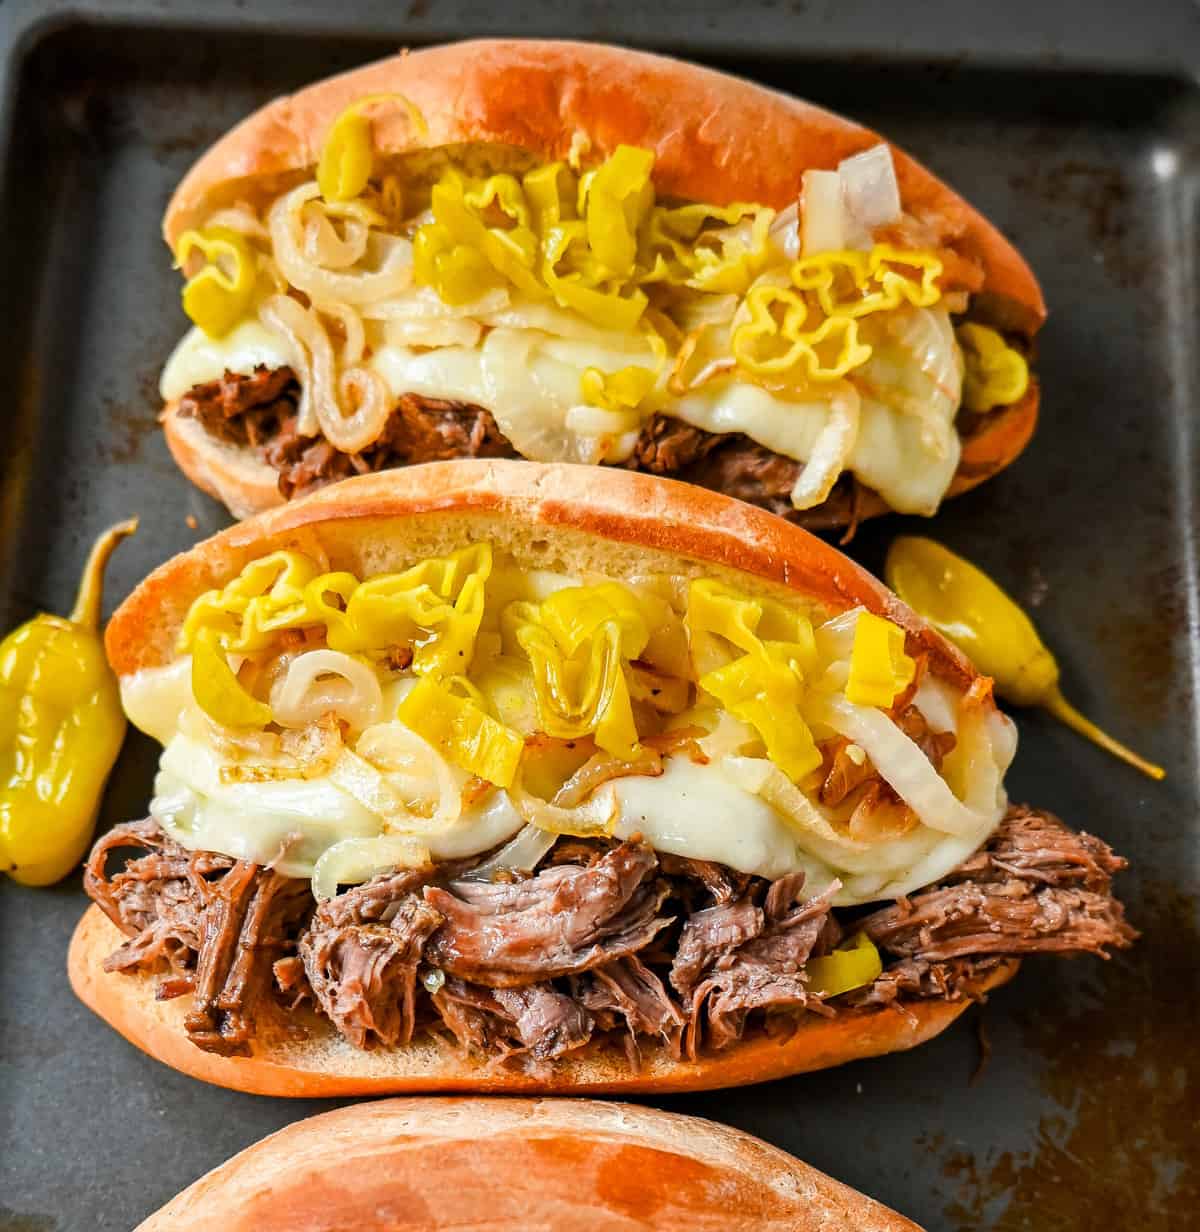 The Best Slow Cooker Italian Beef Sandwiches. These Crockpot Italian Beef Sandwiches are made with flavorful slow cooked beef, shredded to perfection, and placed in a buttered bun, and topped with melted provolone cheese, caramelized onions, and pepperoncini peppers.